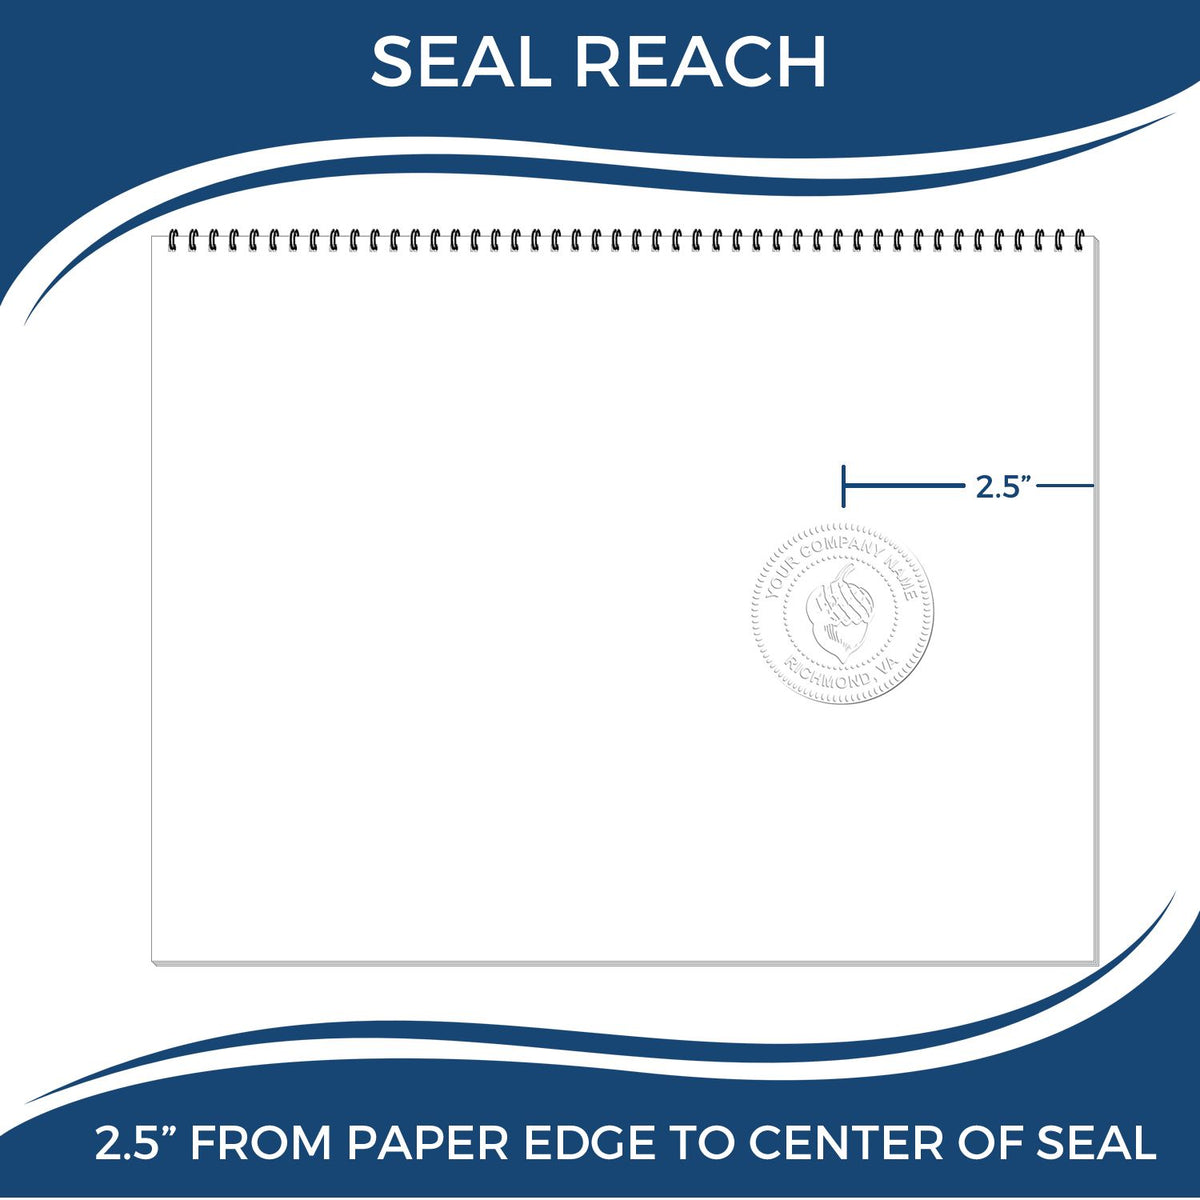 An infographic showing the seal reach which is represented by a ruler and a miniature seal image of the Heavy Duty Cast Iron Vermont Engineer Seal Embosser